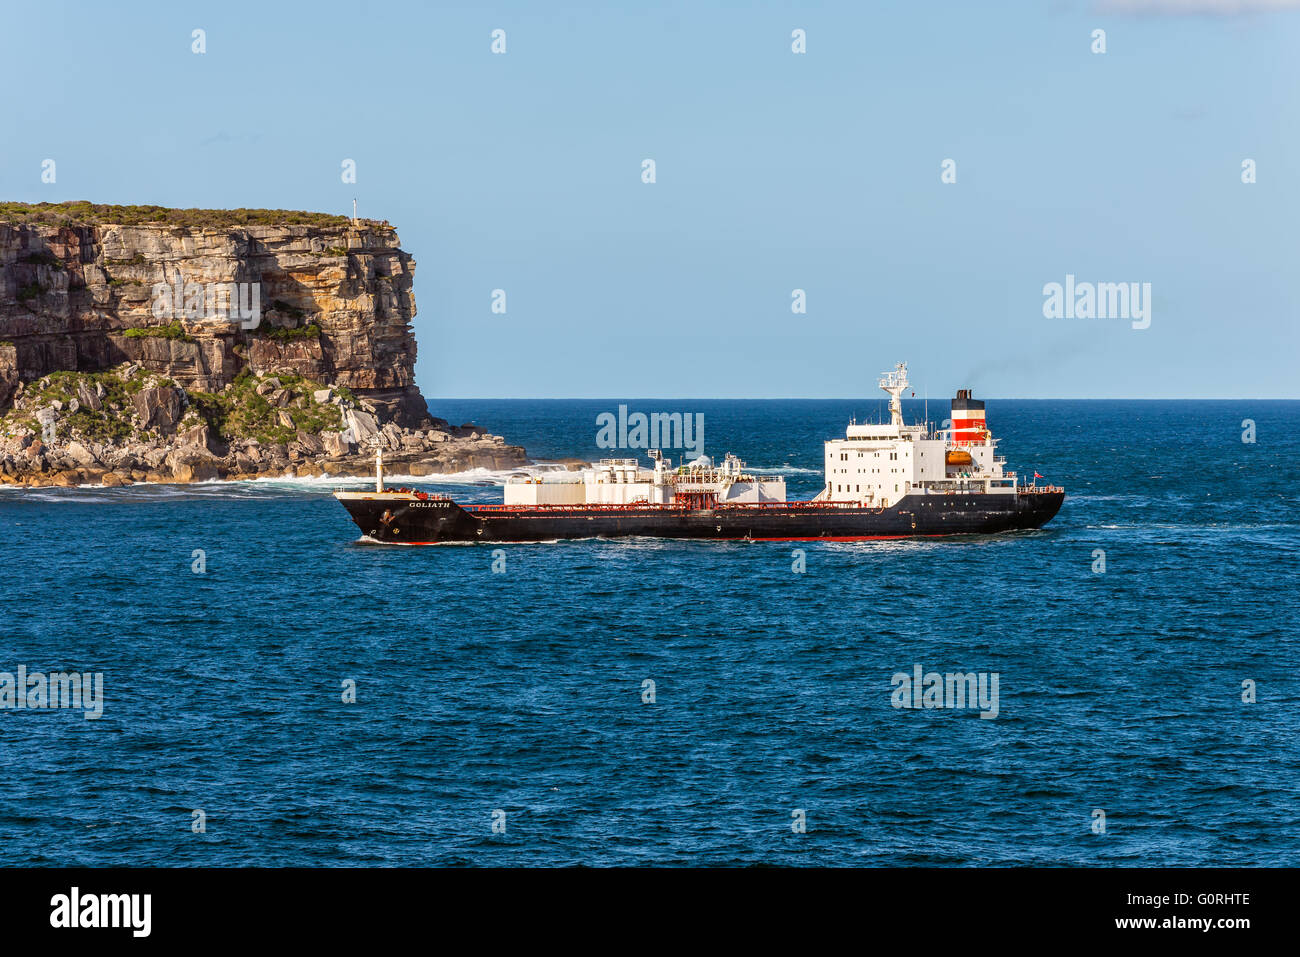 Goliath cement carrier ship navigating west into Sydney Harbour, Sydney, New South Wales, Australia Stock Photo